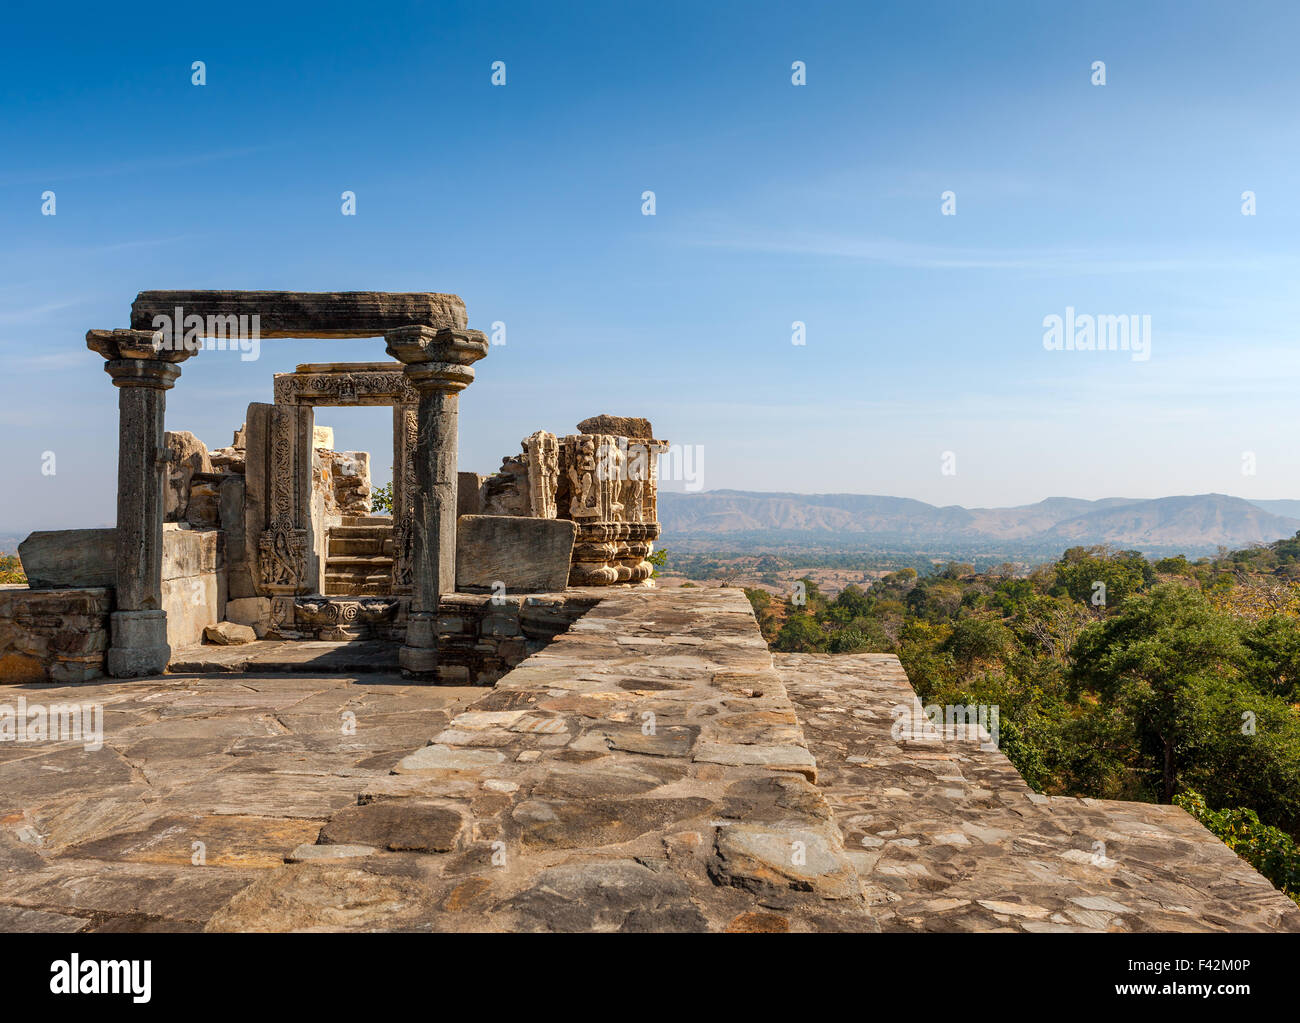 Ruined temple in the Kumbhalgarh fort complex, Rajasthan, India, Asia Stock Photo